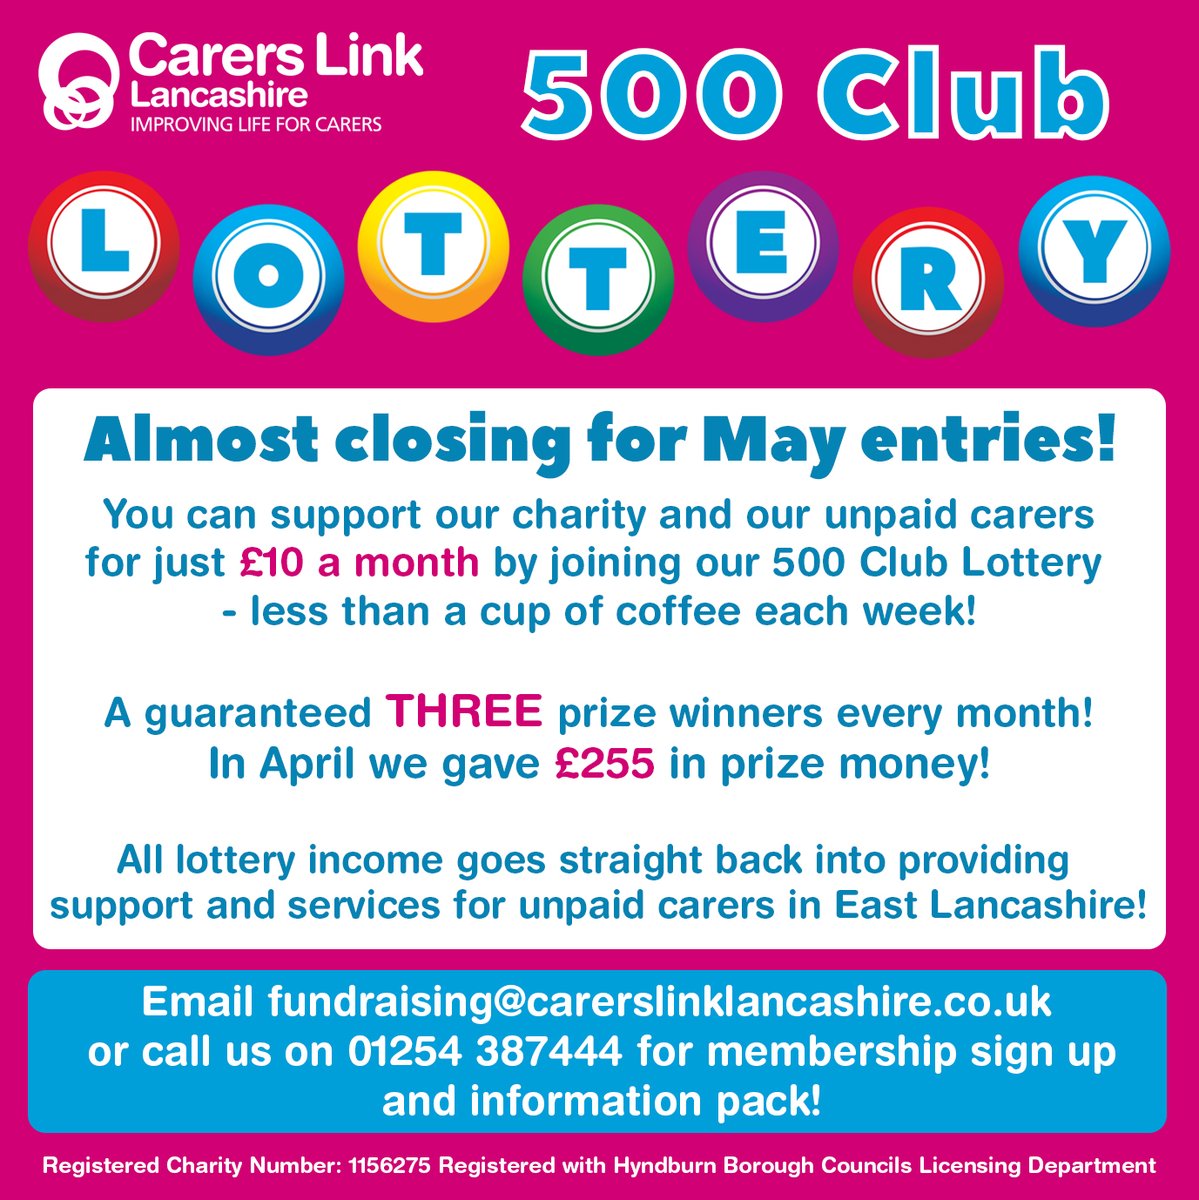 The closing date for new entries in time for our May draw is looming! If you haven't already registered for our monthly lottery, email fundraising@carerslinklancashire.co.uk or call 01254 387444 by Monday 29th April for your chance to win one of THREE CASH PRIZES every month.